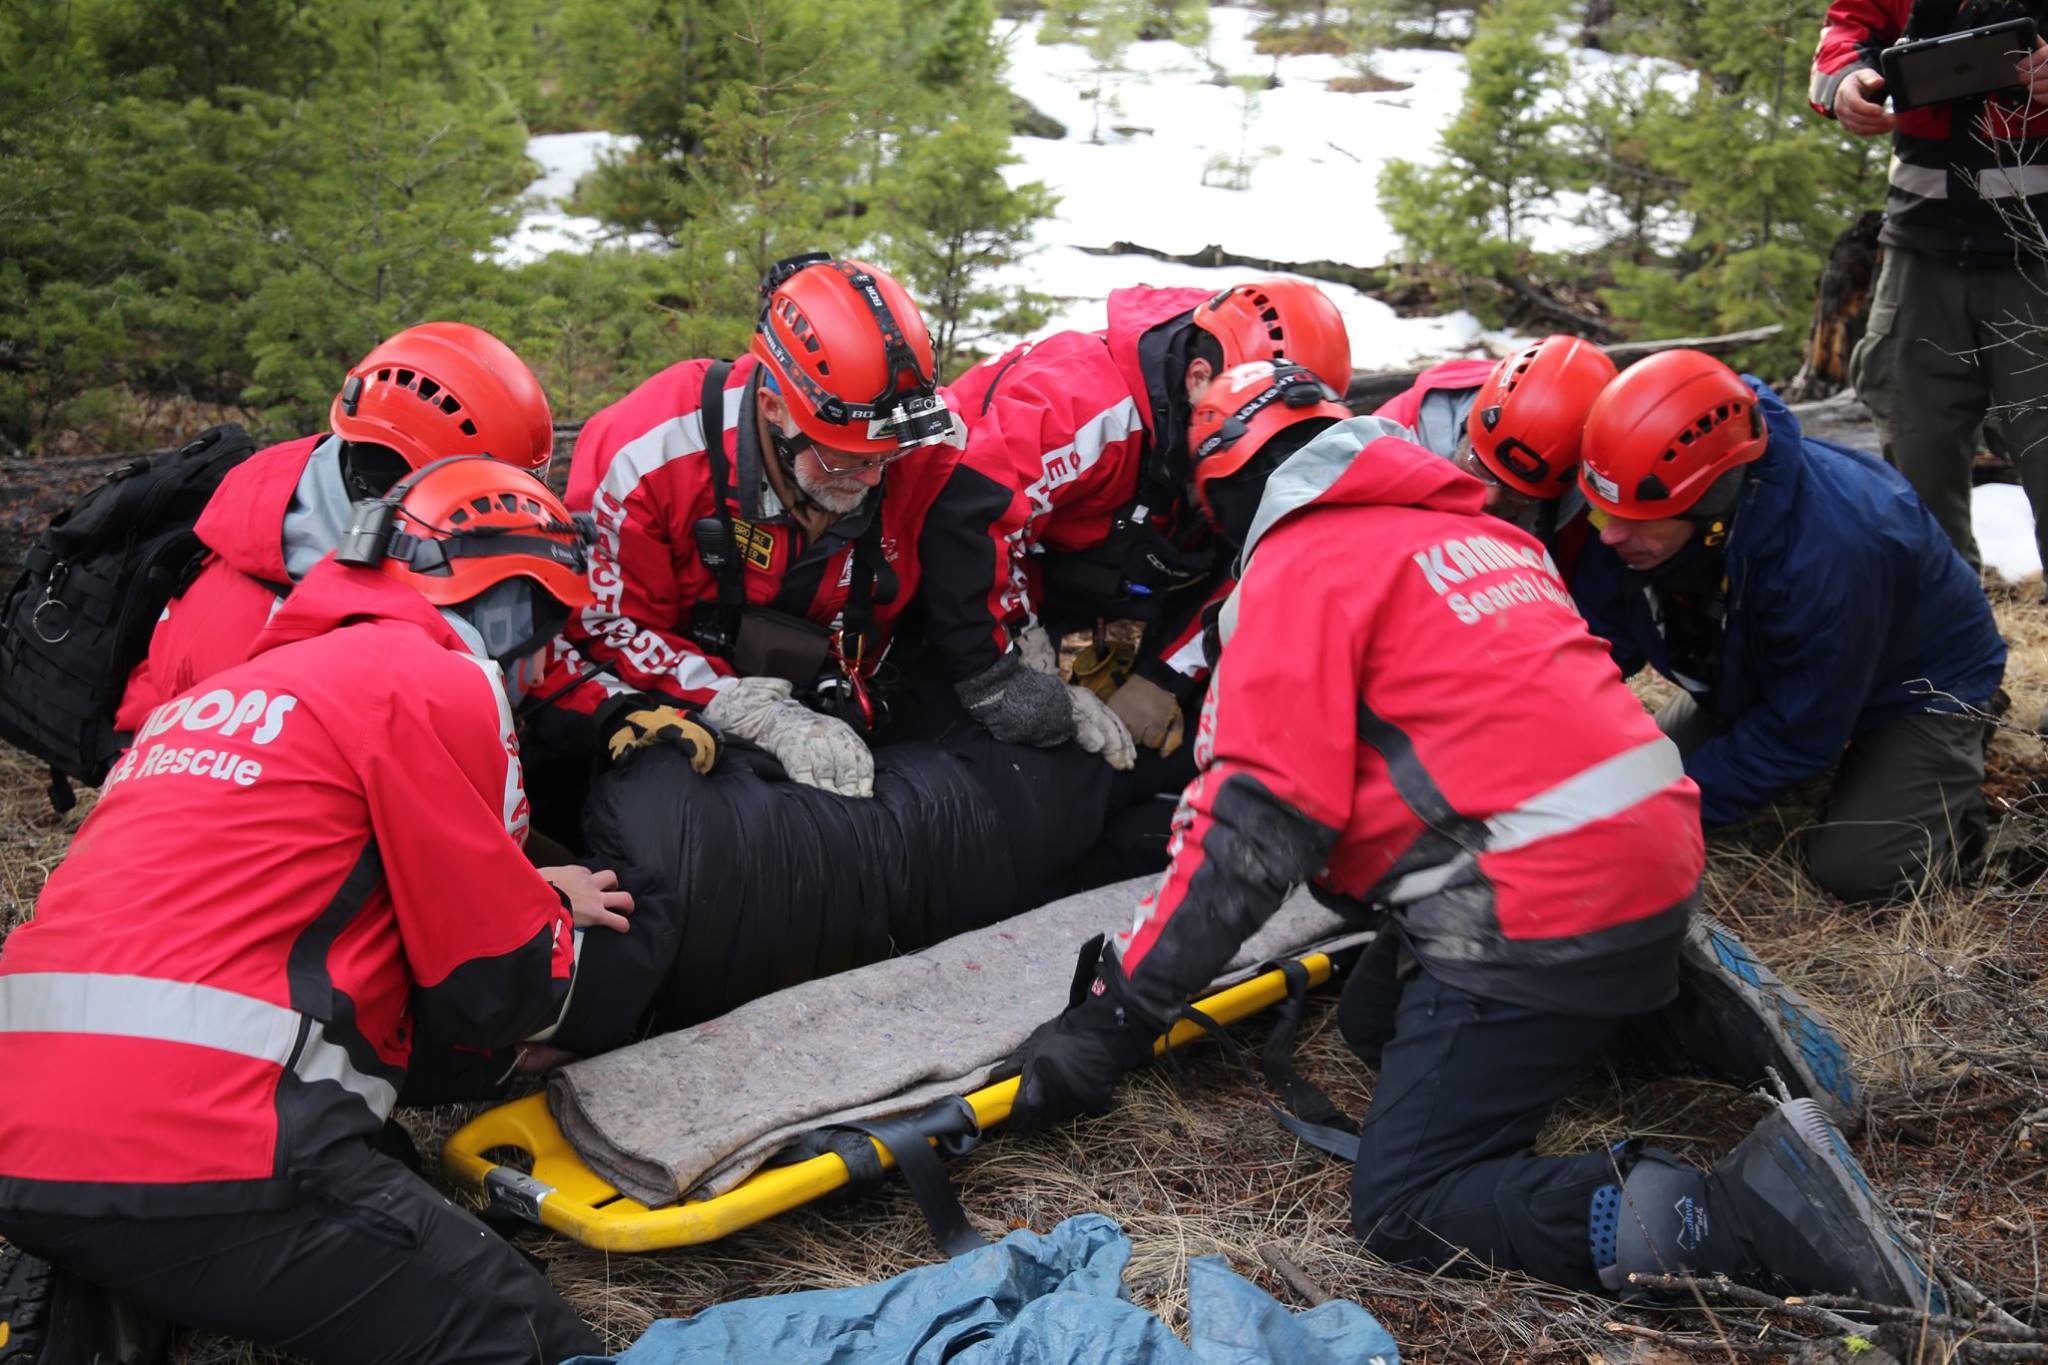 Search and rescue officials concerned increased calls could deplete protective equipment supply